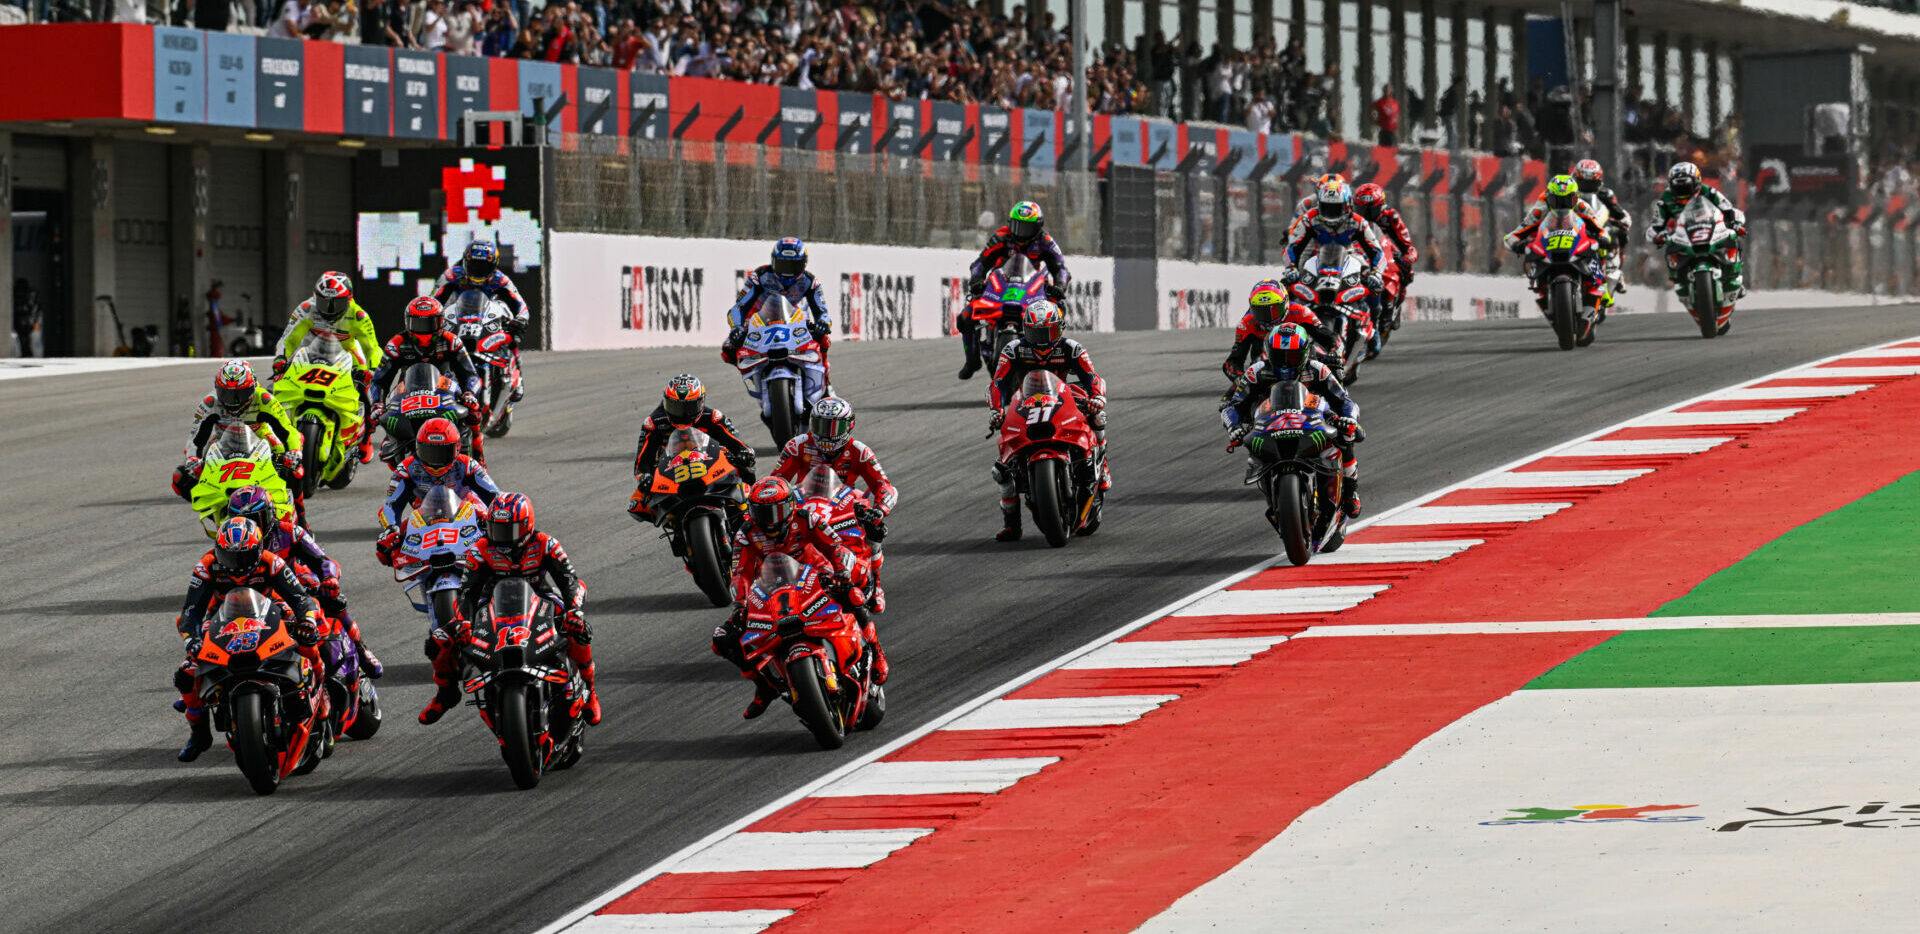 Jack Miller (43), Maverick Vinales (12), and Francesco Bagnaia (1) fight for the lead into Turn One at the start of Saturday's MotoGP Sprint Race in Portugal. Photo courtesy Dorna.